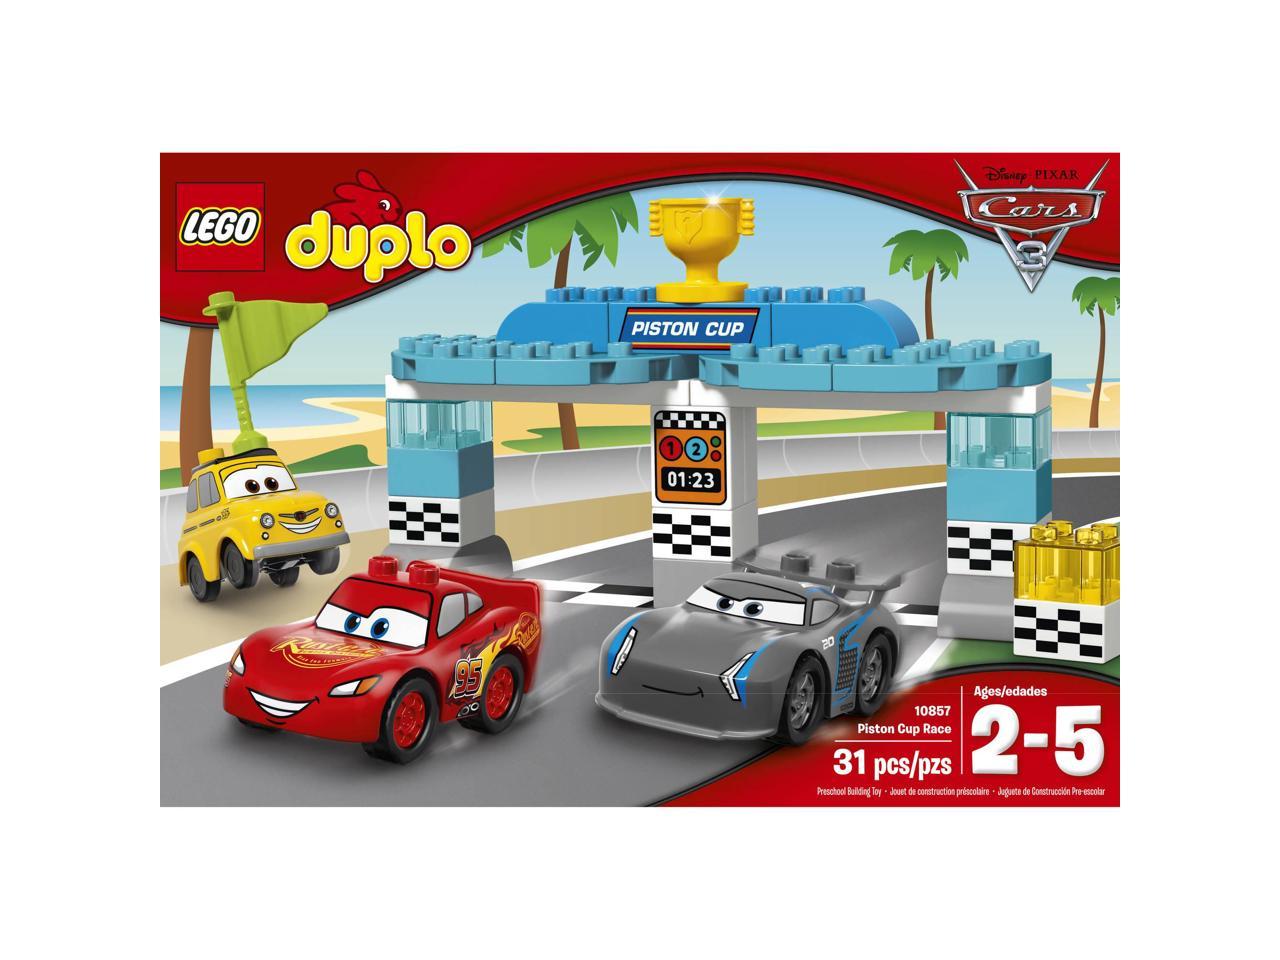 LEGO 10857 Piston Cup Race Building Kit Duplo Cars 2017 NEW